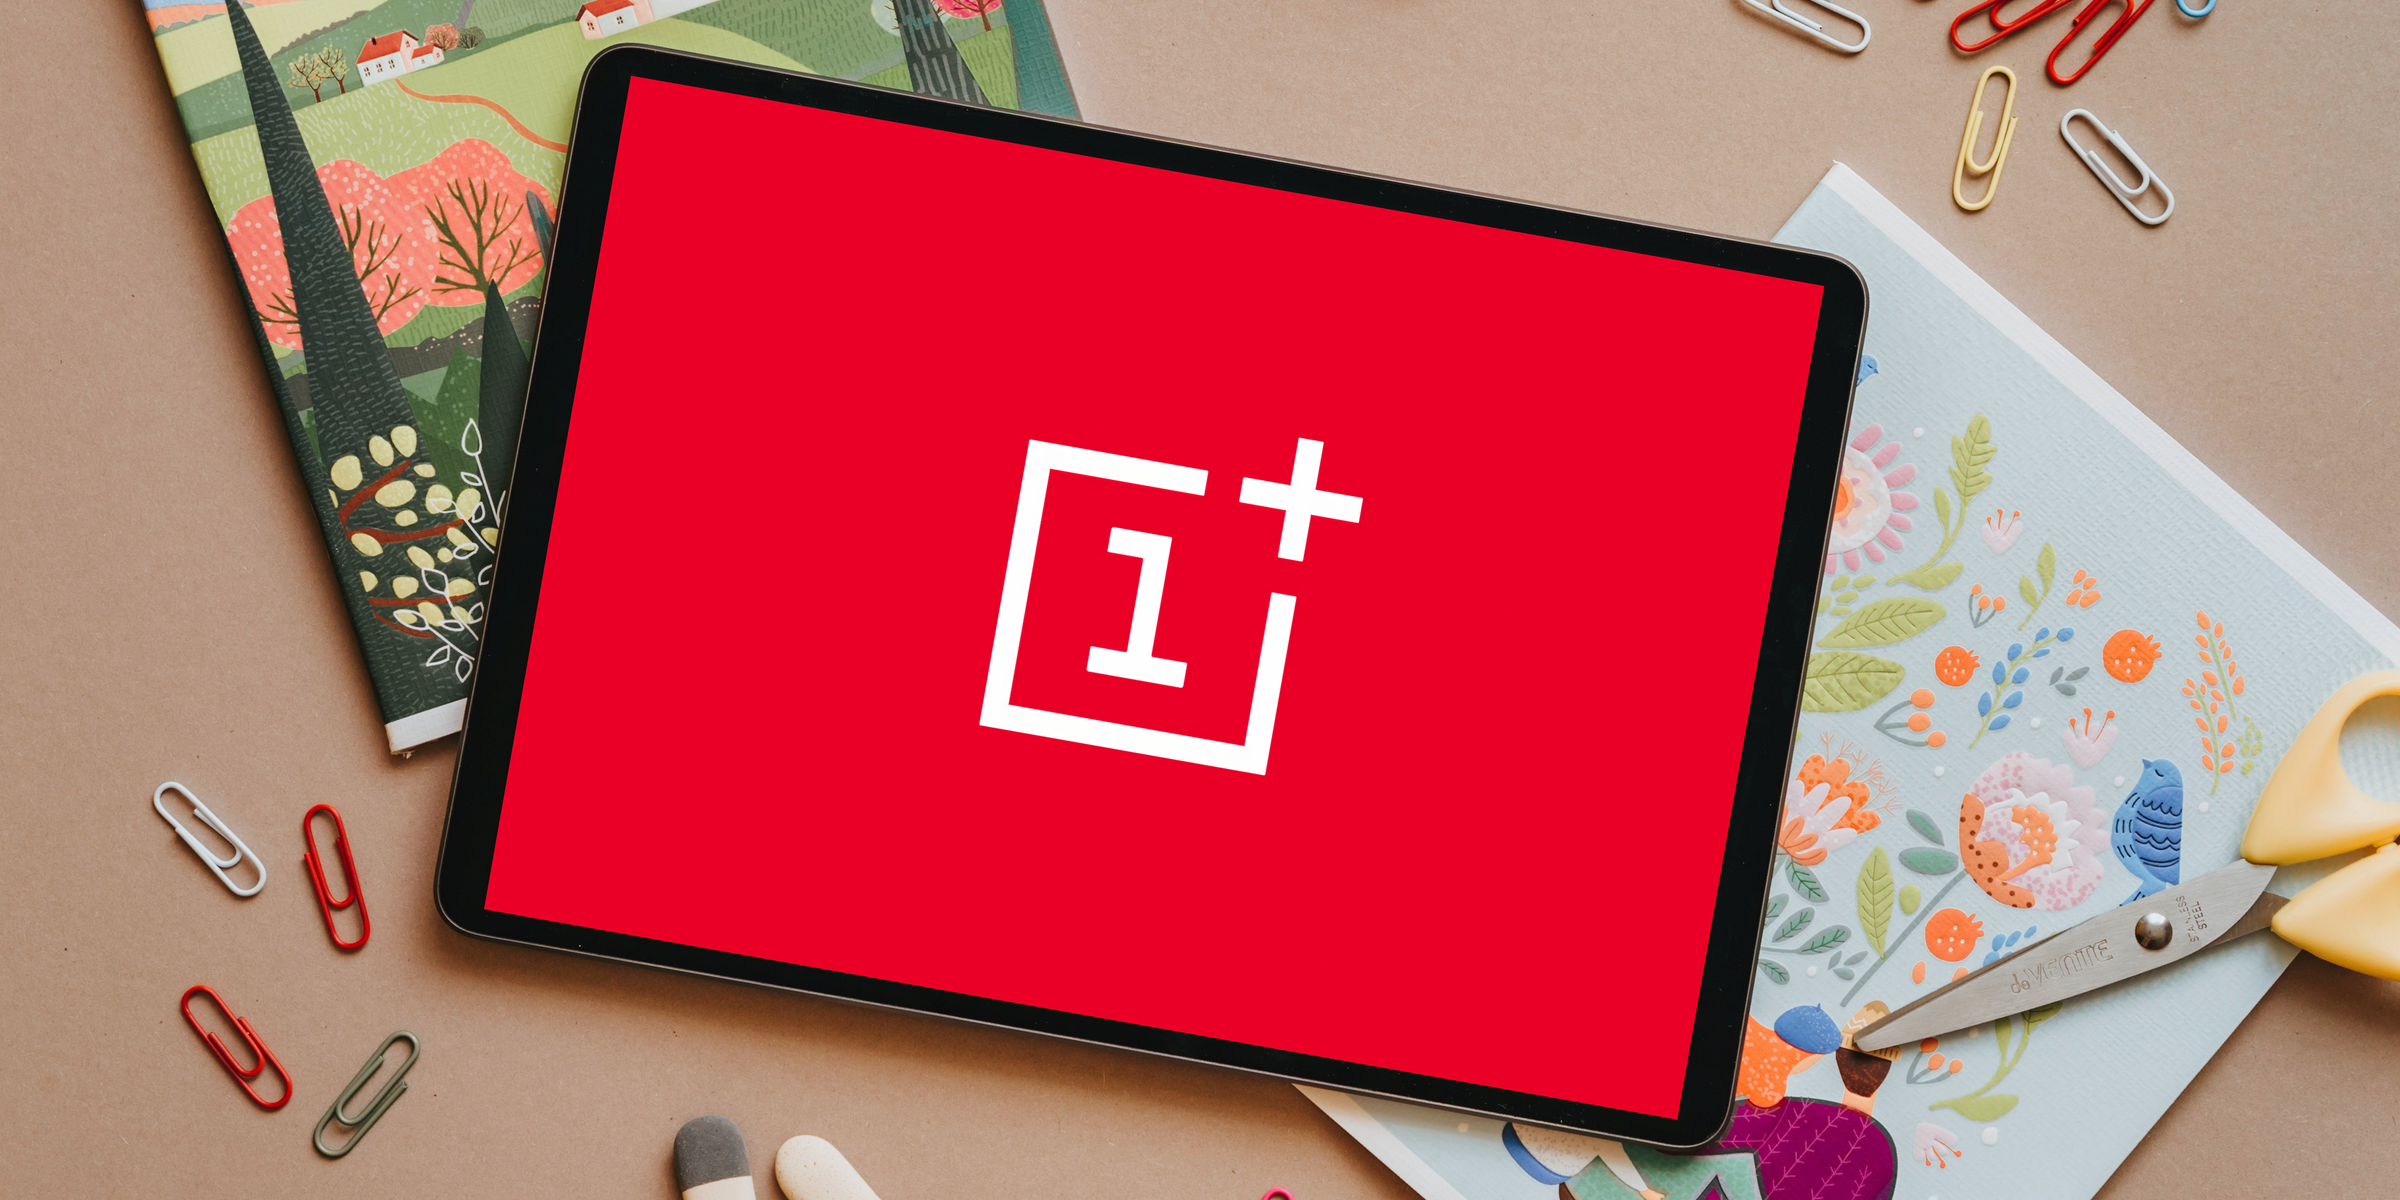 Insider: OnePlus will unveil the first tablet on February 7 along with the flagships OnePlus 11 and OnePlua 11R